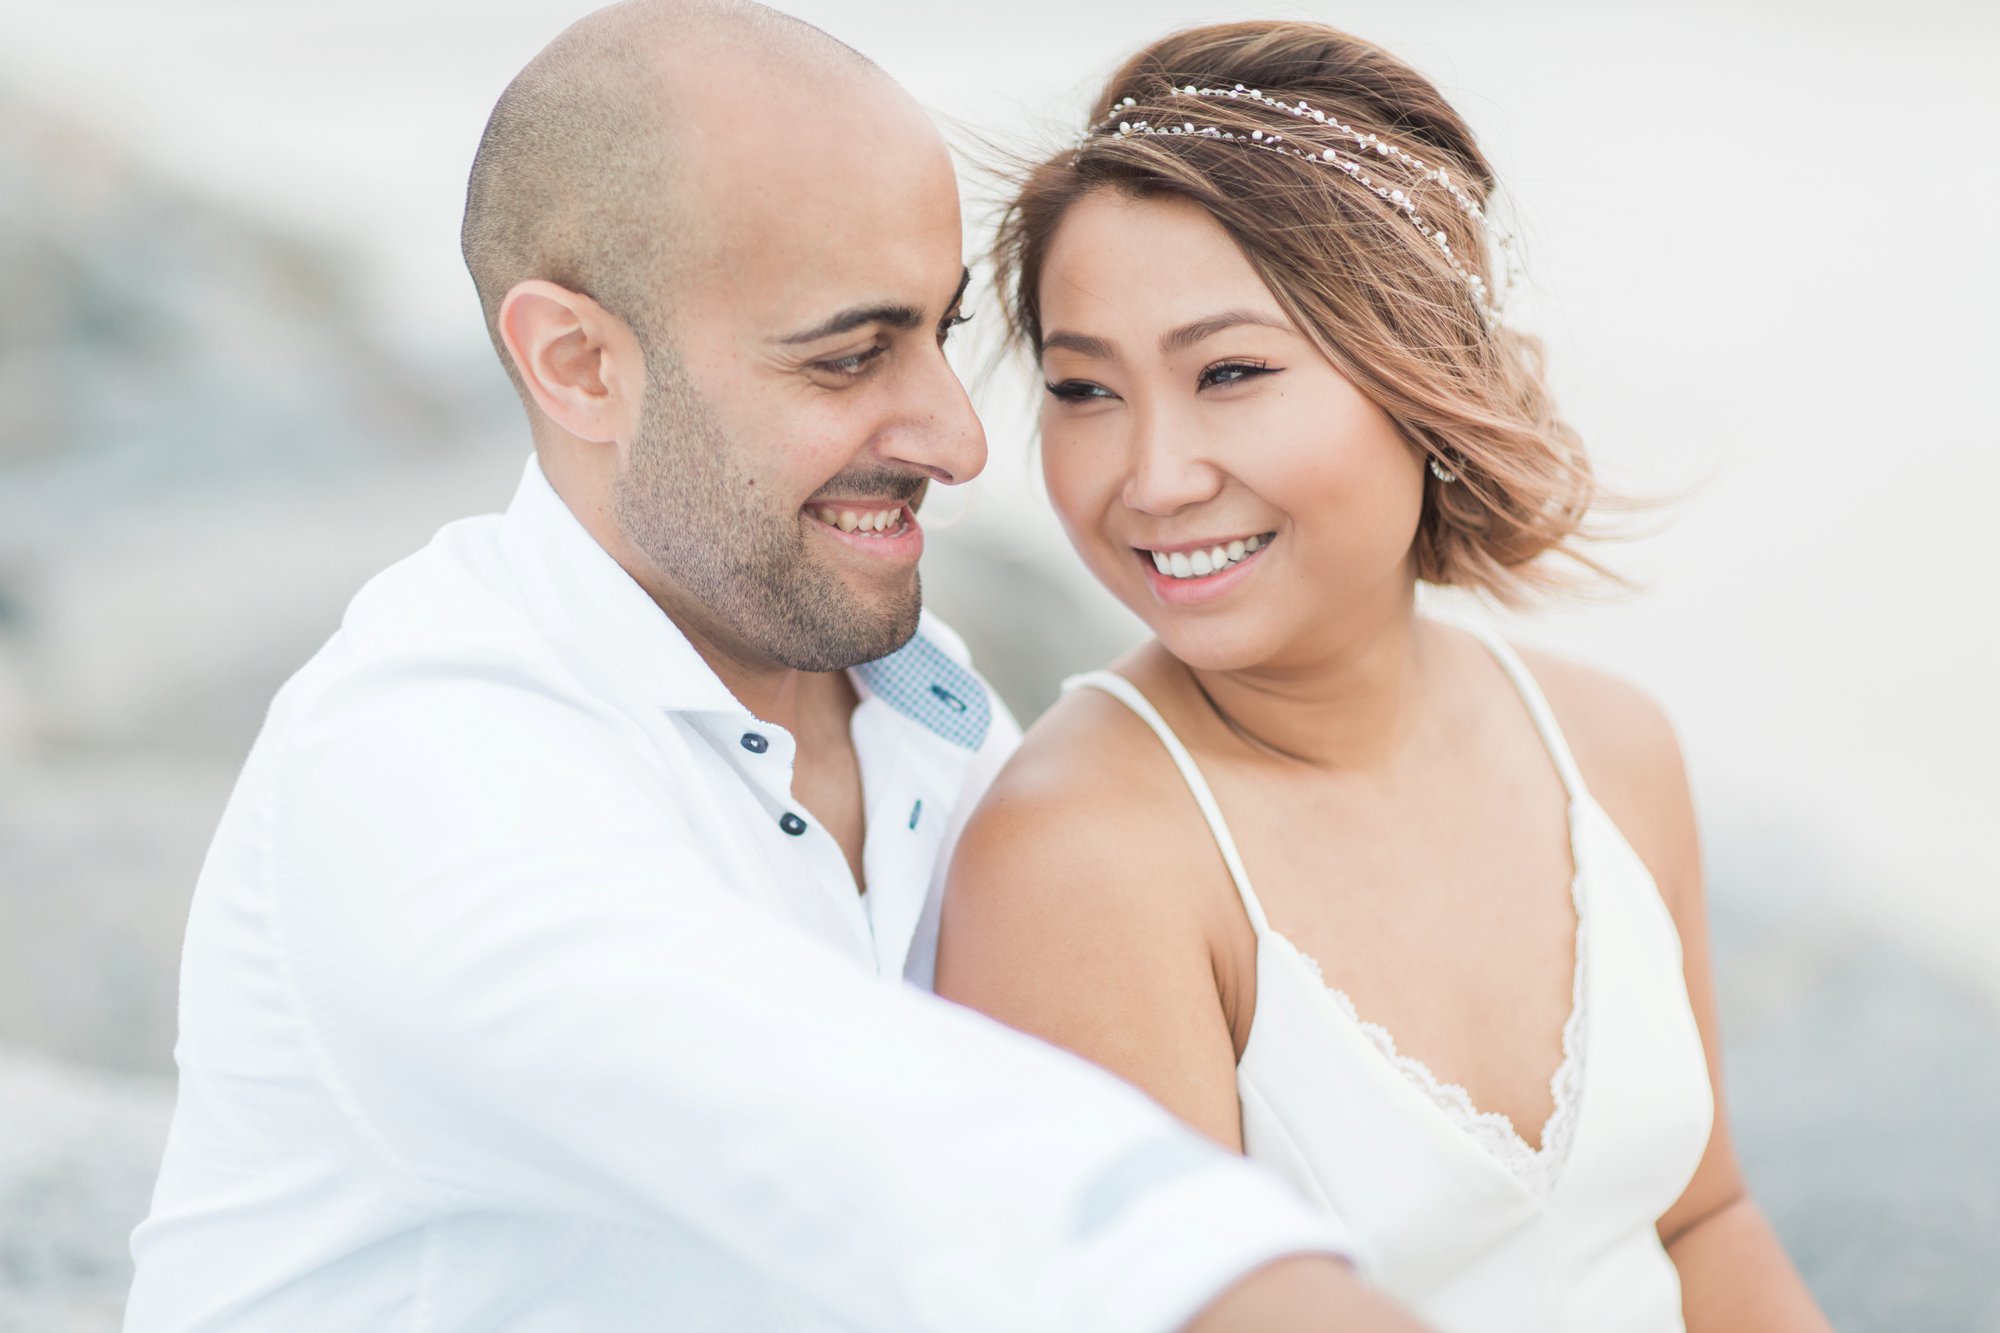 Intimate Elopement at Ponce Inlet 